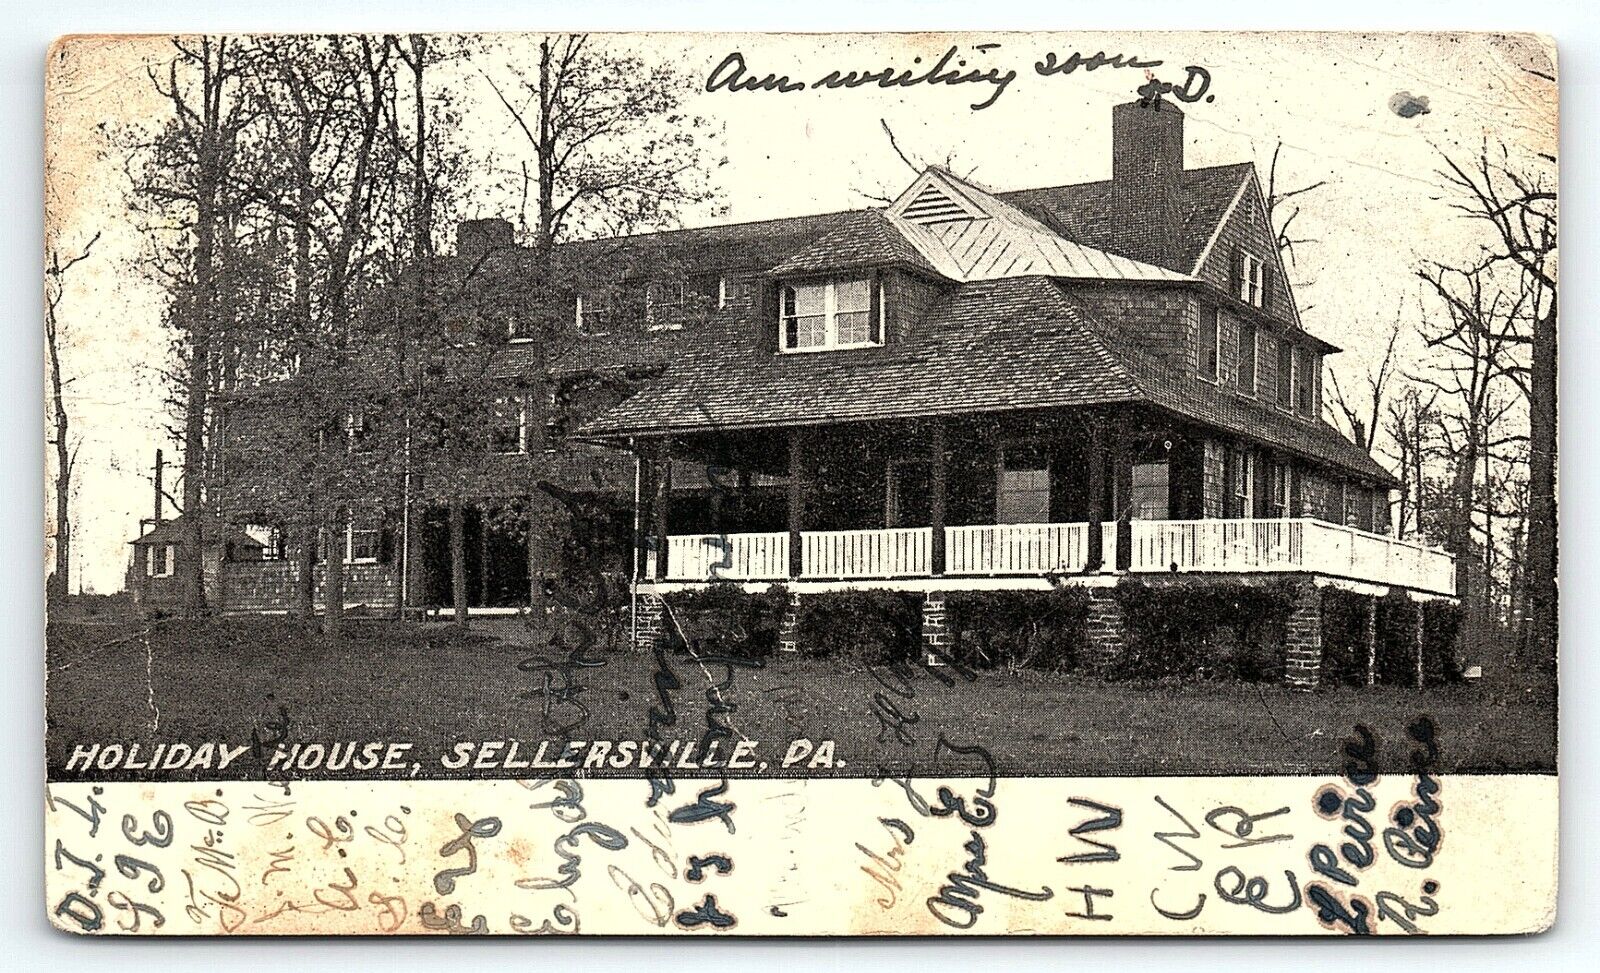 1906 SELLERSVILLE PA HOLIDAY HOUSE EARLY UNDIVIDED POSTCARD P4189